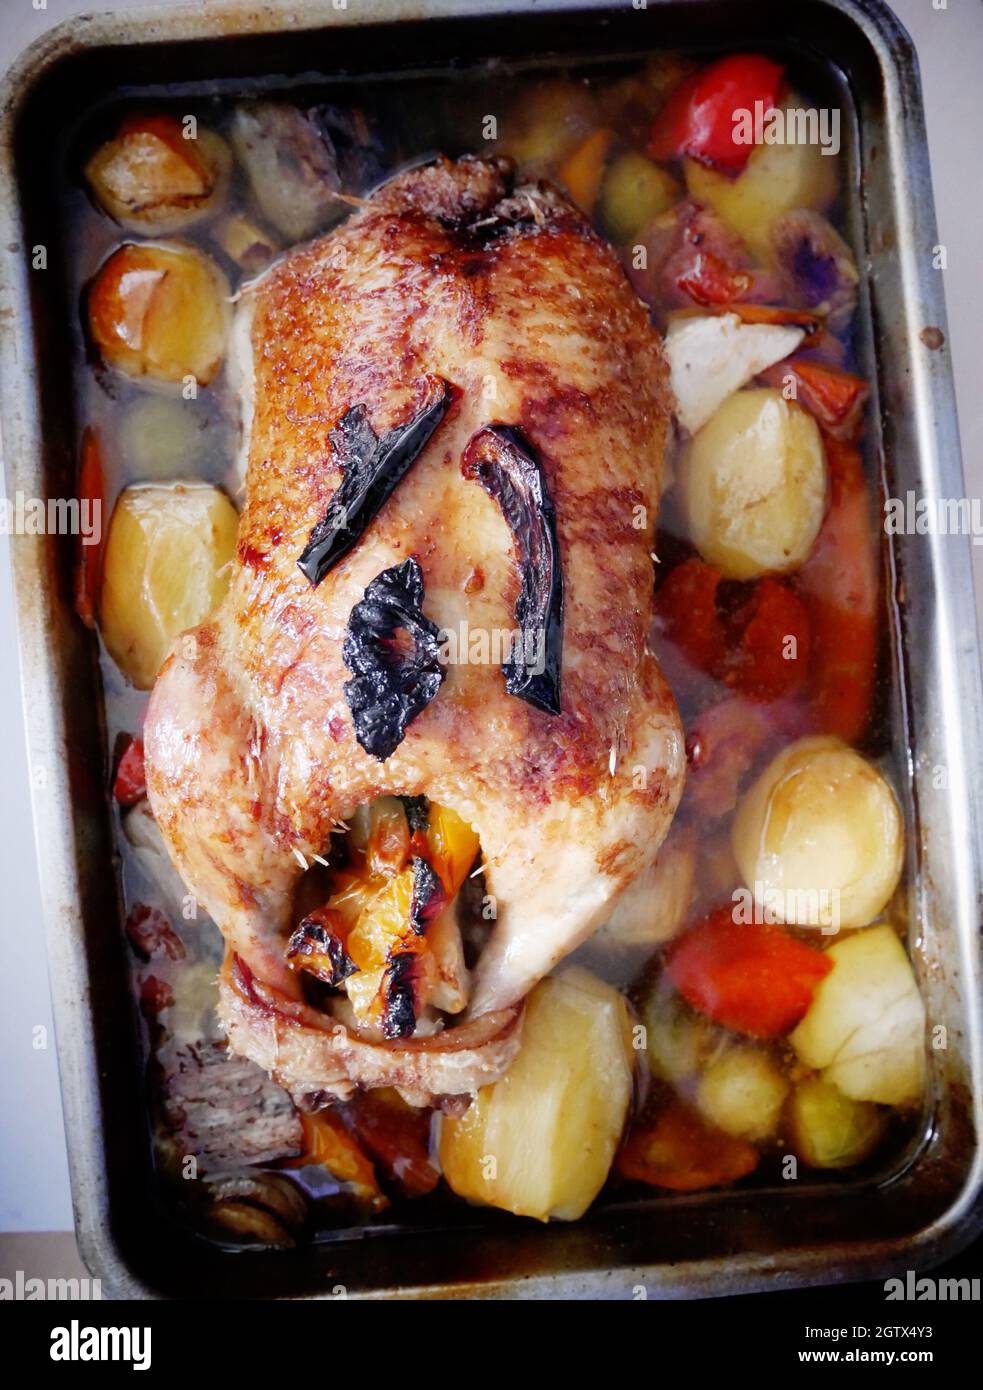 High Angle View Of Roasted Meat And Vegetables Served In Tray Stock Photo